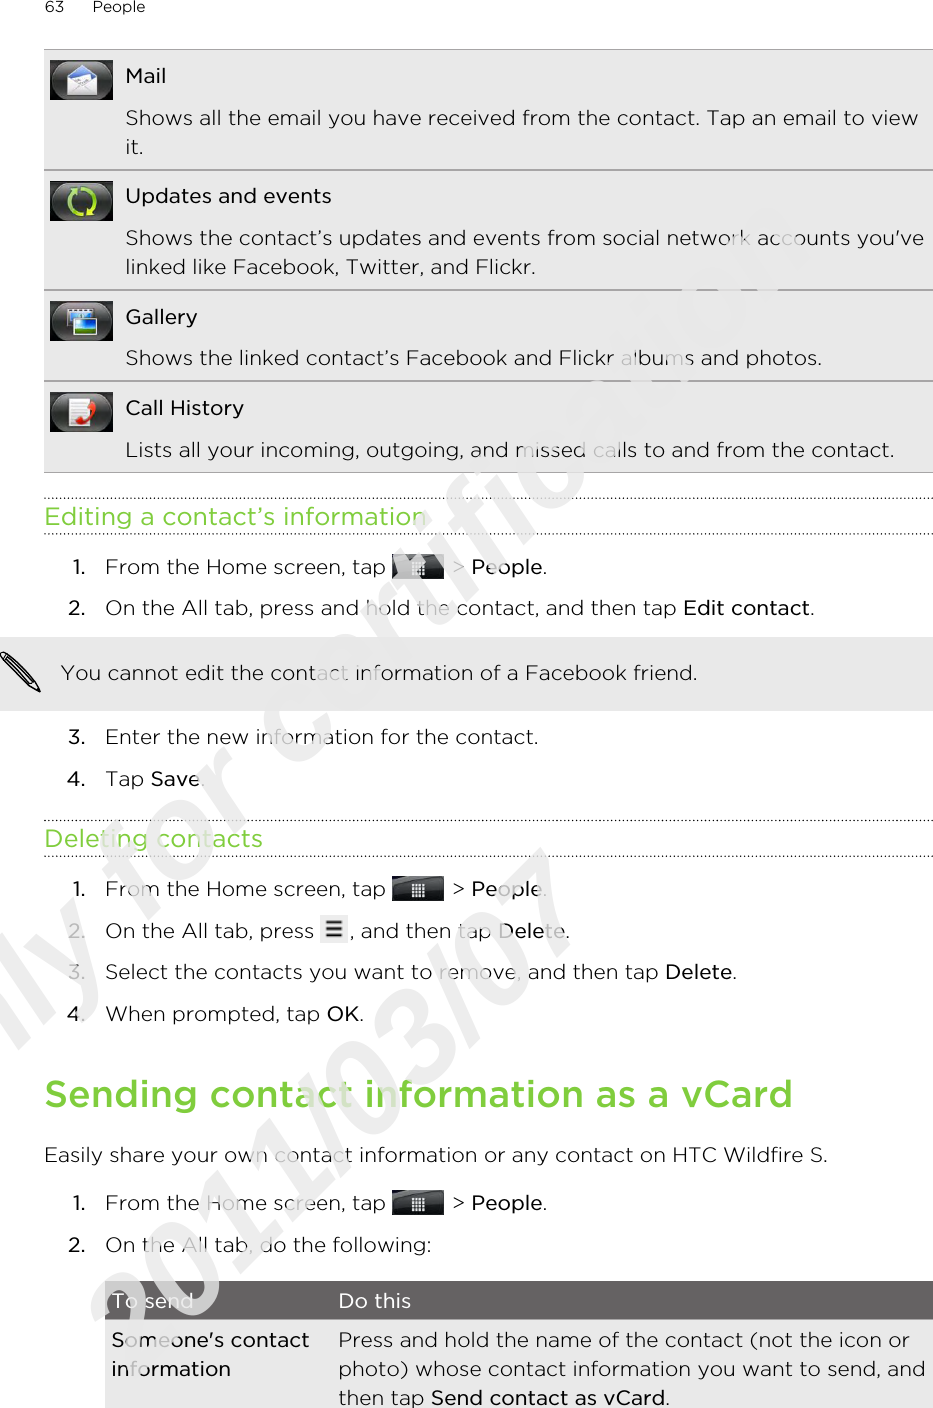 MailShows all the email you have received from the contact. Tap an email to viewit.Updates and eventsShows the contact’s updates and events from social network accounts you&apos;velinked like Facebook, Twitter, and Flickr.GalleryShows the linked contact’s Facebook and Flickr albums and photos.Call HistoryLists all your incoming, outgoing, and missed calls to and from the contact.Editing a contact’s information1. From the Home screen, tap   &gt; People.2. On the All tab, press and hold the contact, and then tap Edit contact. You cannot edit the contact information of a Facebook friend.3. Enter the new information for the contact.4. Tap Save.Deleting contacts1. From the Home screen, tap   &gt; People.2. On the All tab, press  , and then tap Delete.3. Select the contacts you want to remove, and then tap Delete.4. When prompted, tap OK.Sending contact information as a vCardEasily share your own contact information or any contact on HTC Wildfire S.1. From the Home screen, tap   &gt; People.2. On the All tab, do the following:To send Do thisSomeone&apos;s contactinformationPress and hold the name of the contact (not the icon orphoto) whose contact information you want to send, andthen tap Send contact as vCard.63 PeopleOnly for certification  2011/03/07